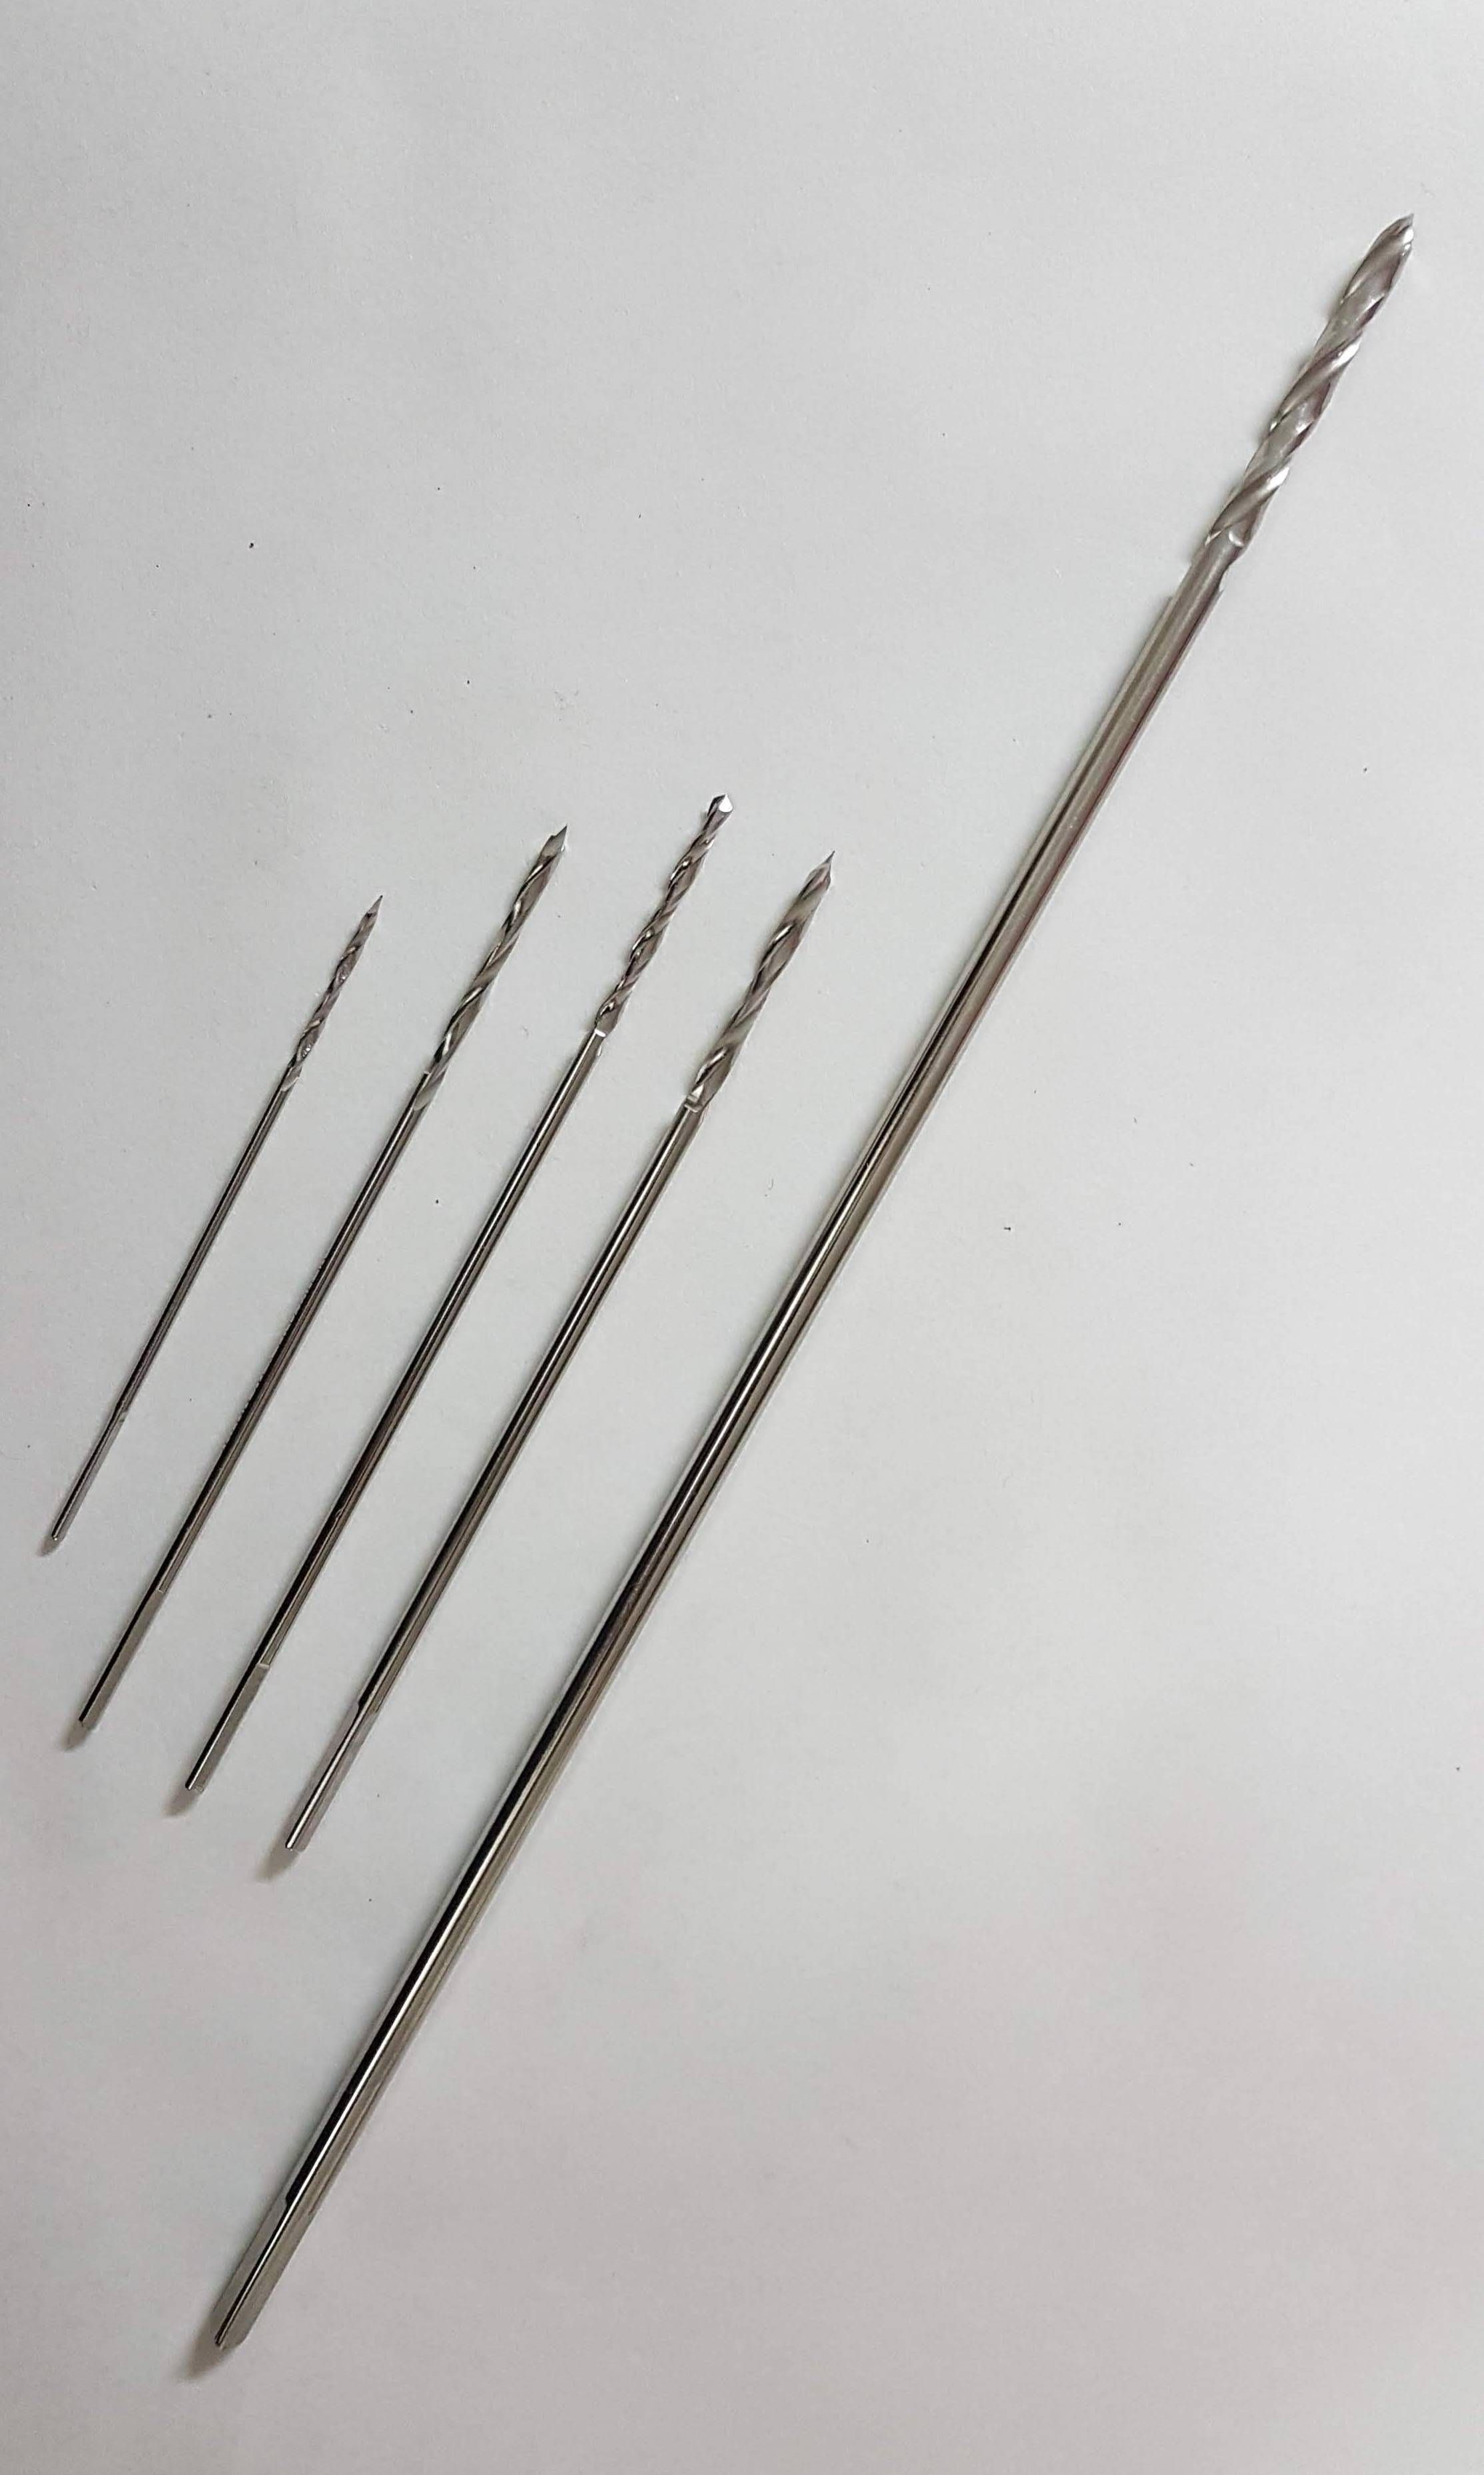 Drill Bit S.S. 420J 52HRC Used in Orthopedic Instruments